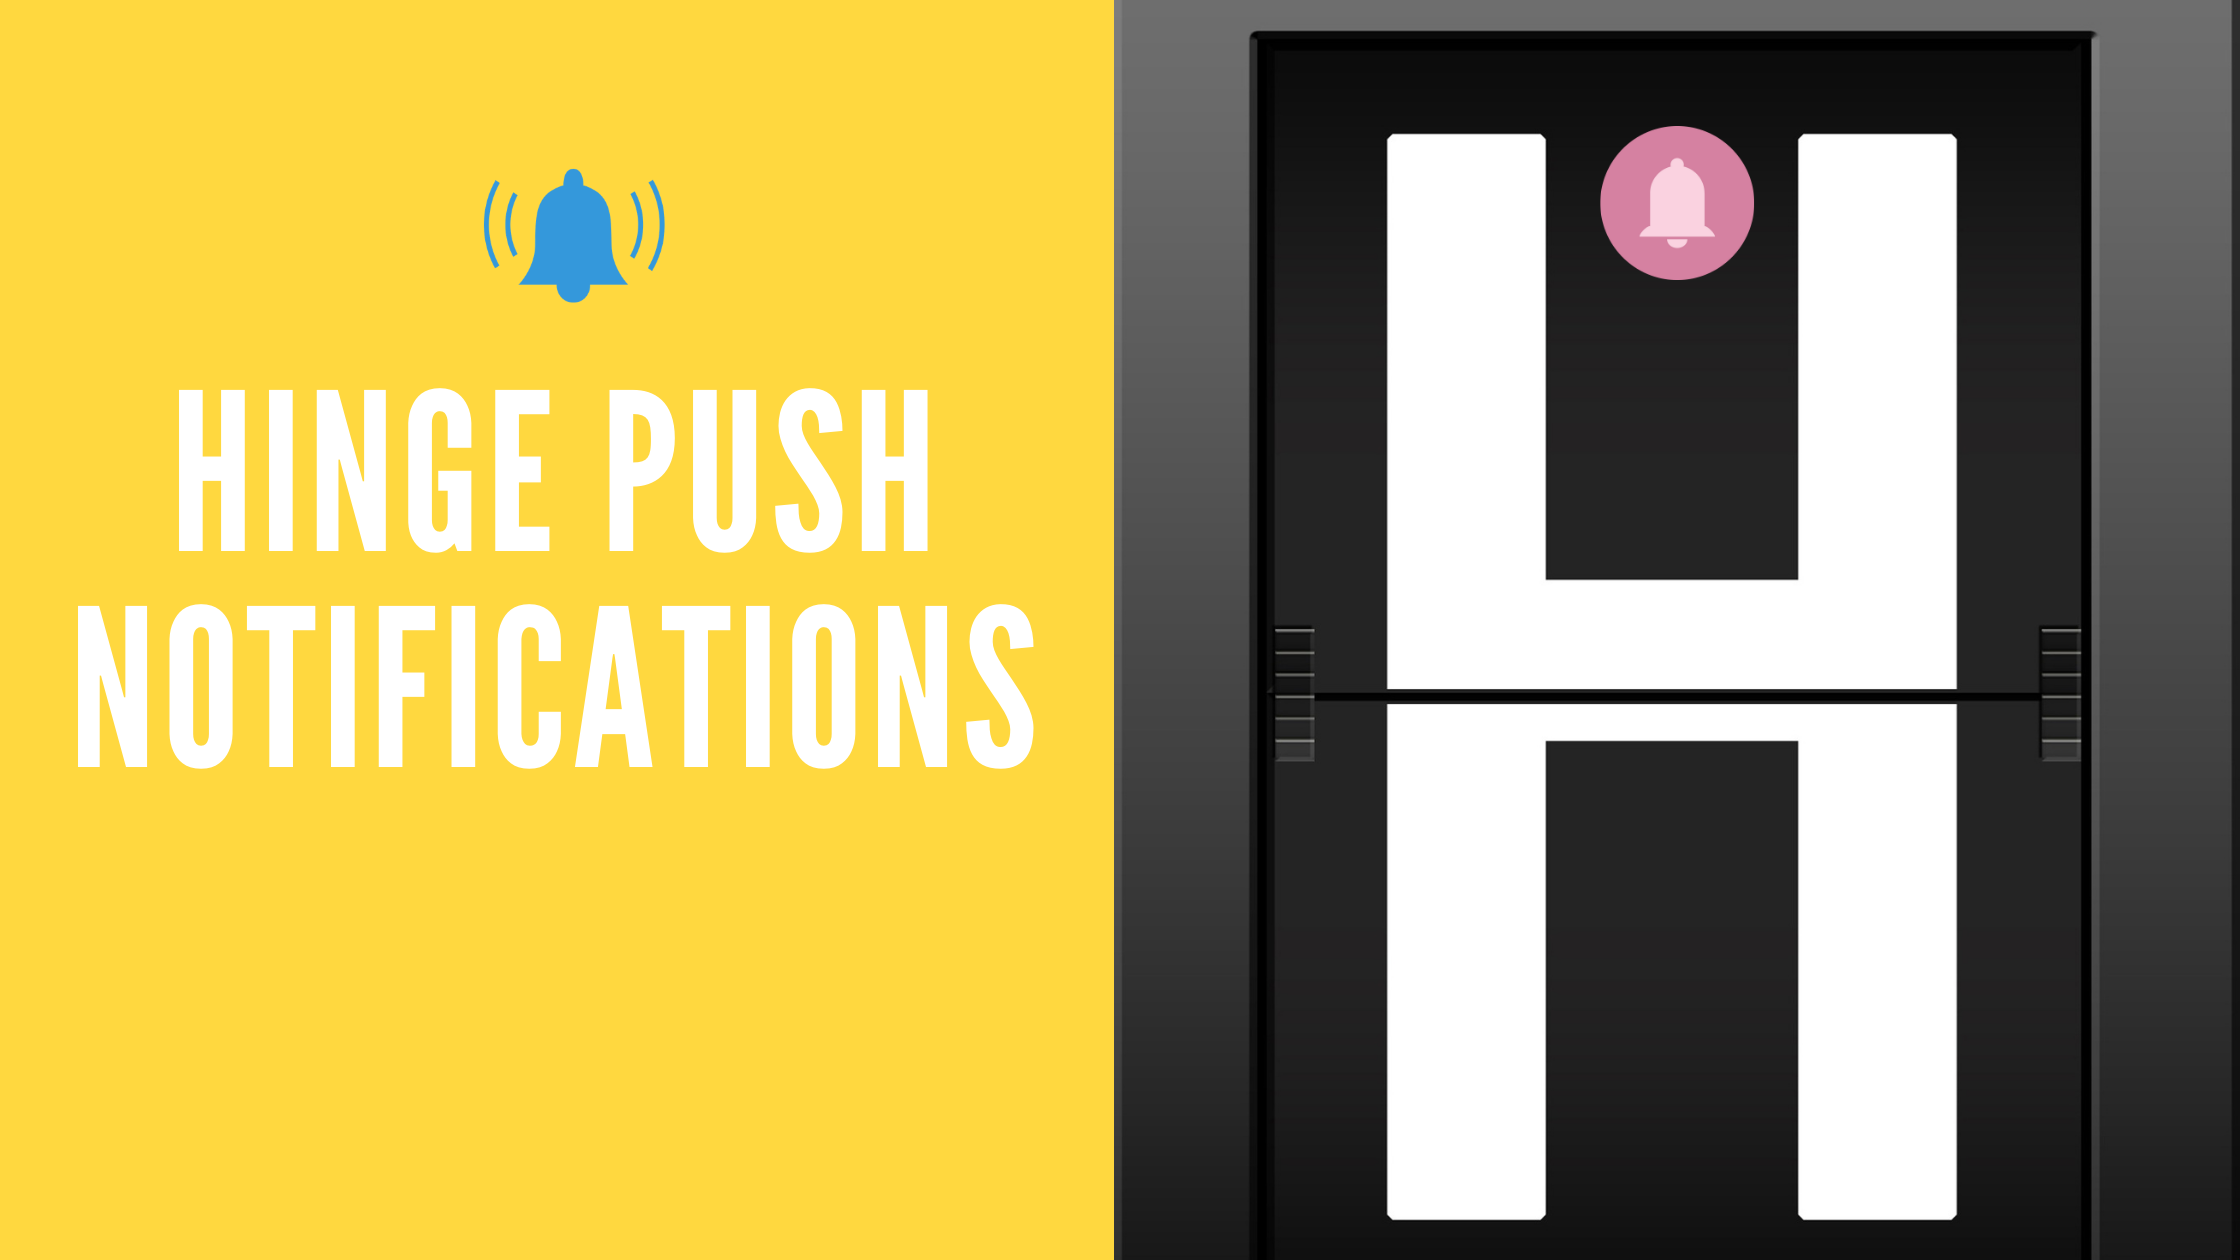 How To Enable Or Disable Hinge Push Notifications